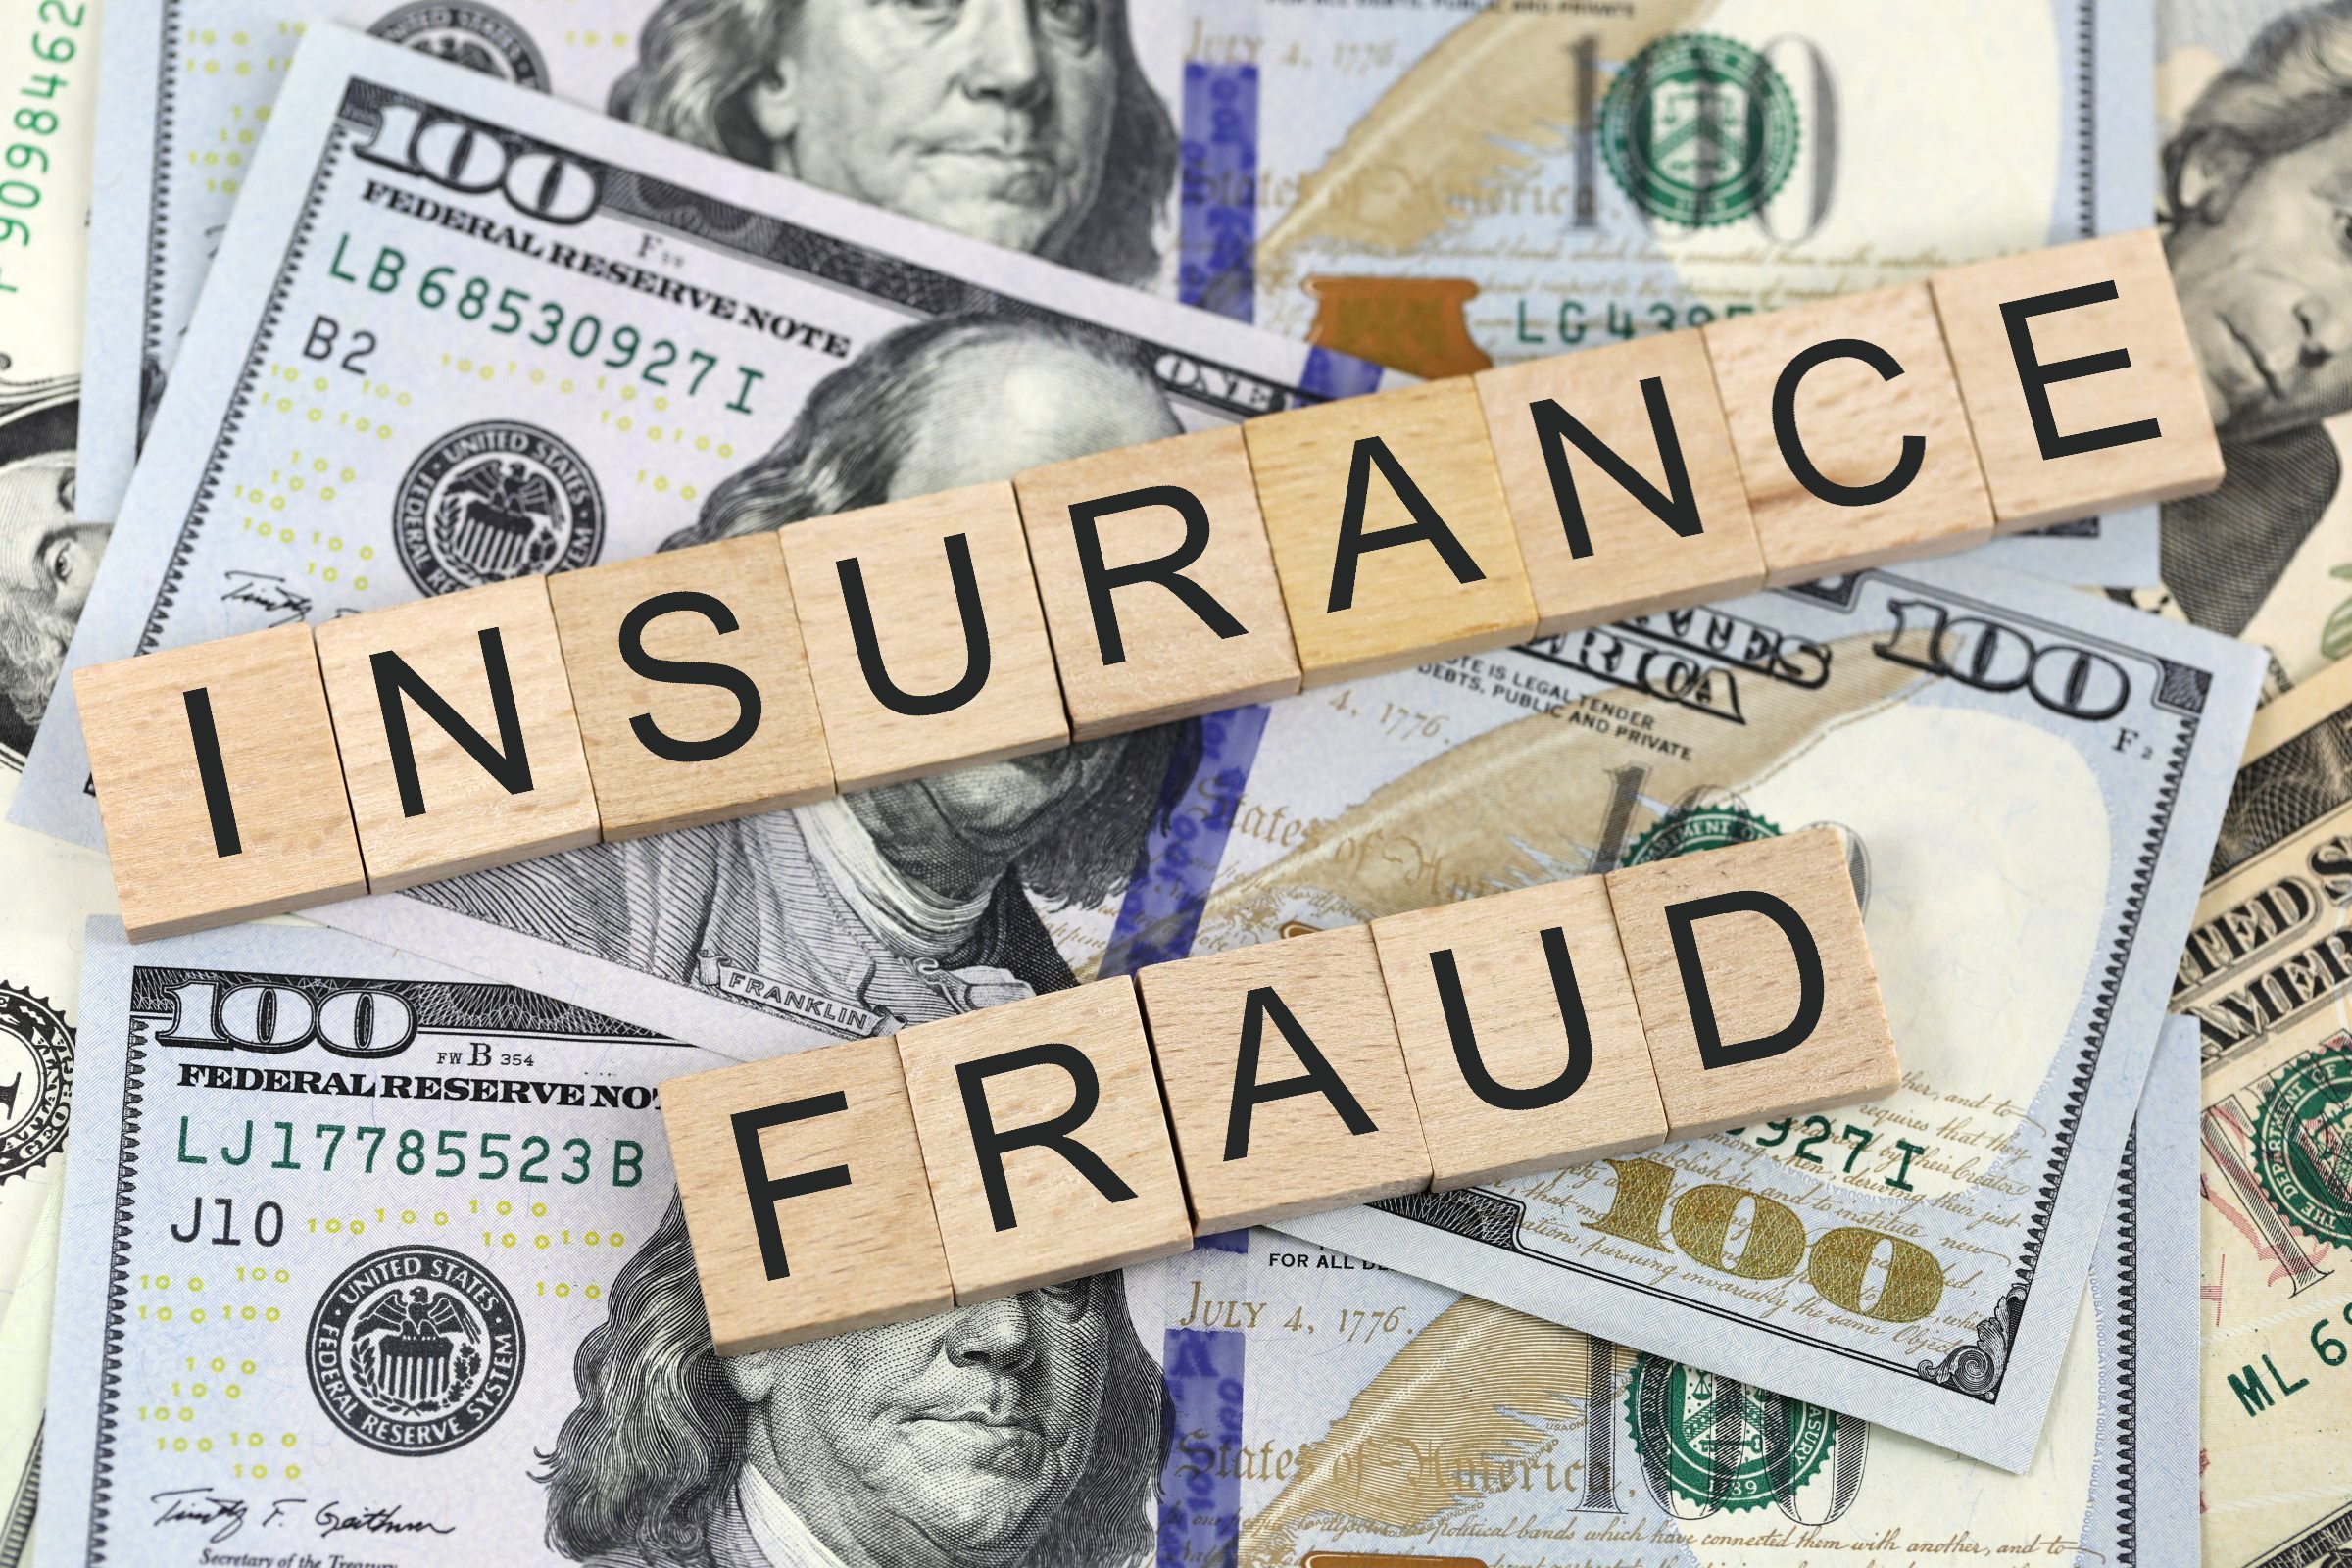 Types of Most Common Insurance Frauds by Individuals